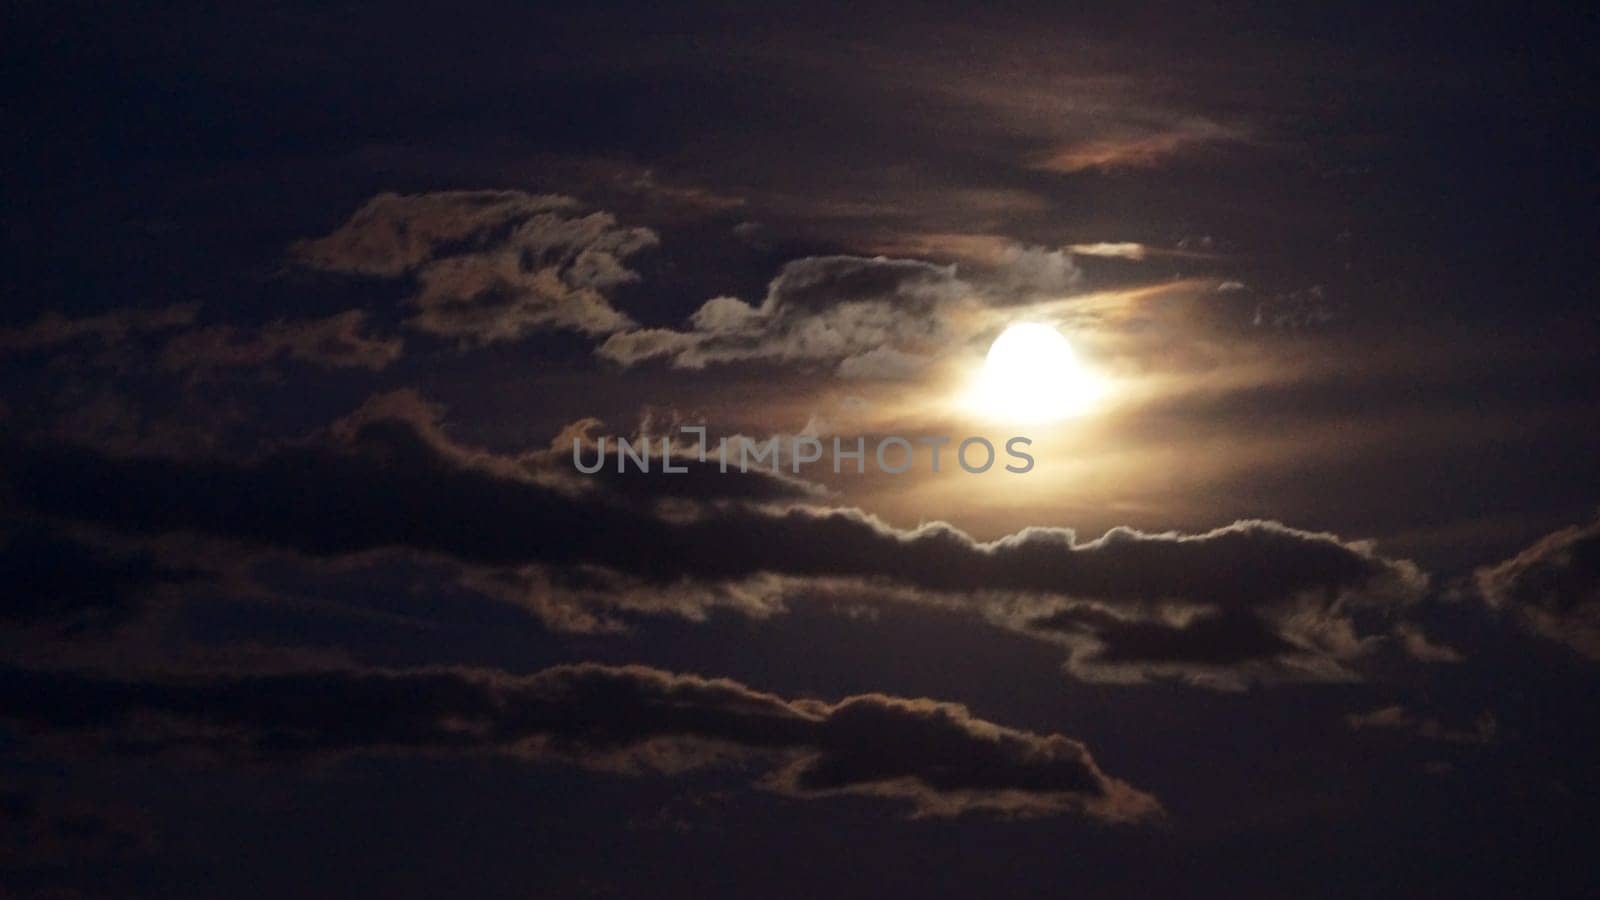 bright full moon illuminates the clouds in the night sky, dramatic sky by Annado